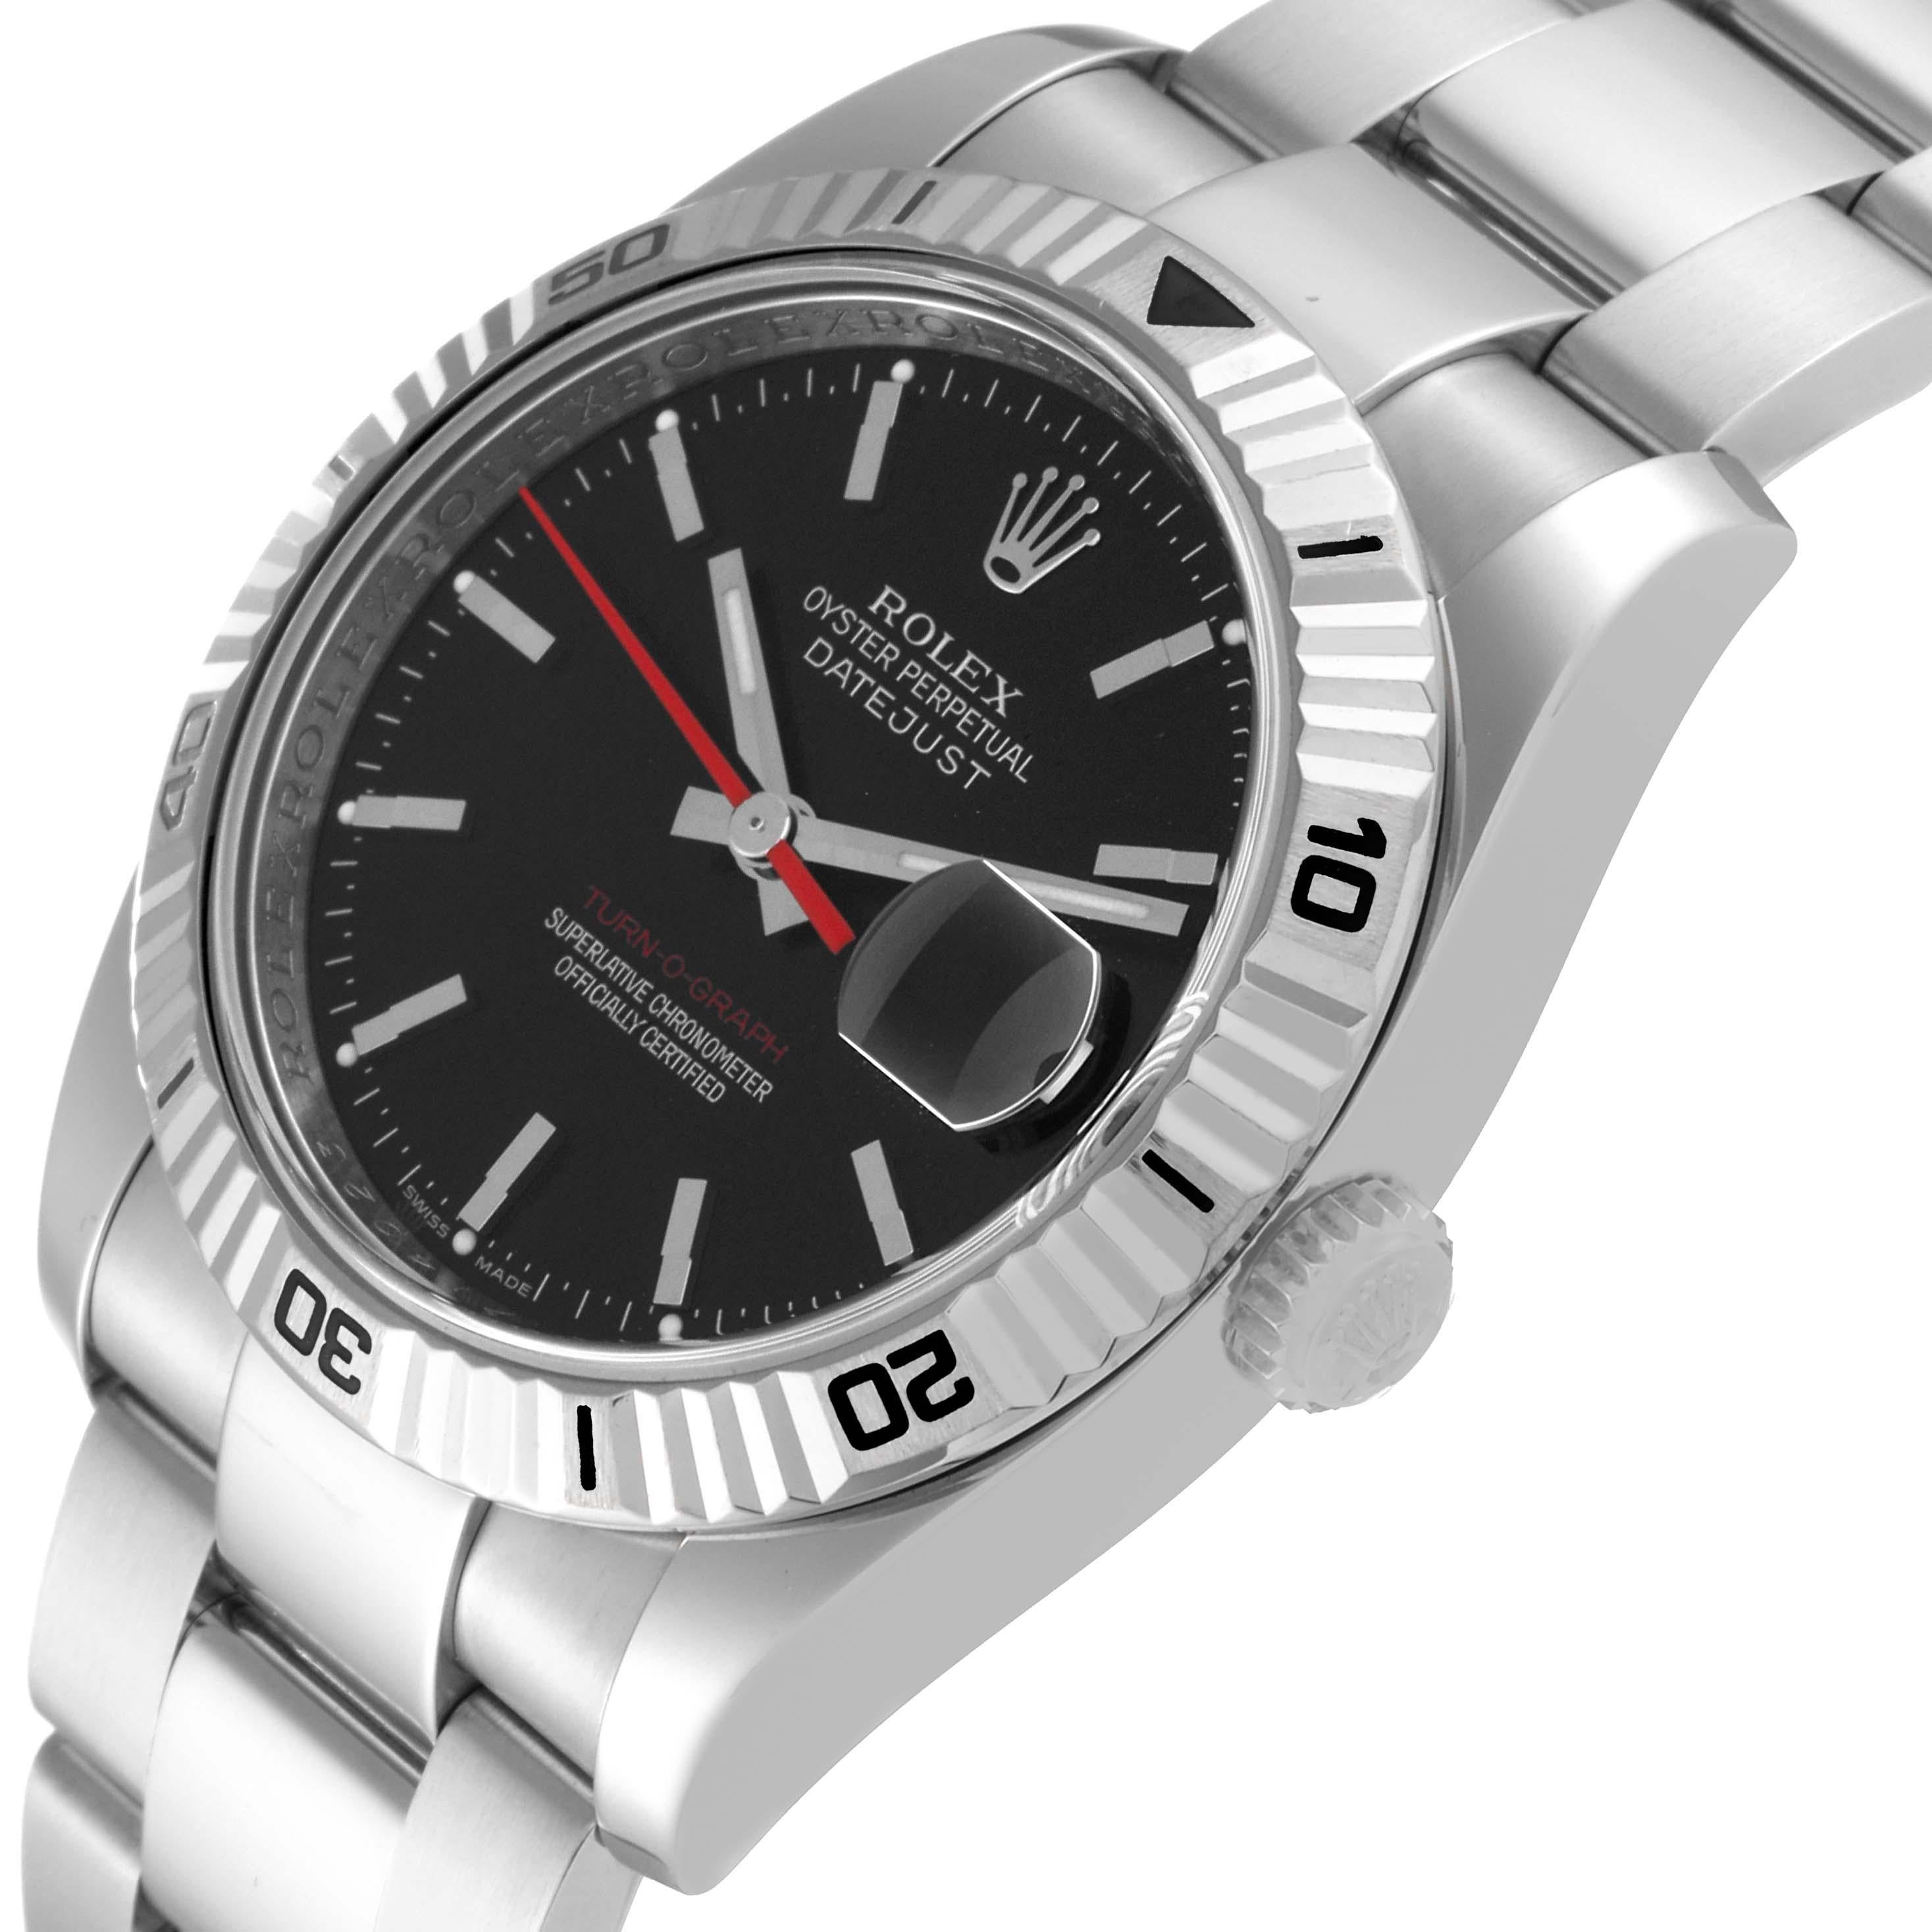 Rolex Datejust Turnograph Black Dial Steel White Gold Watch 116264 Box Papers 1